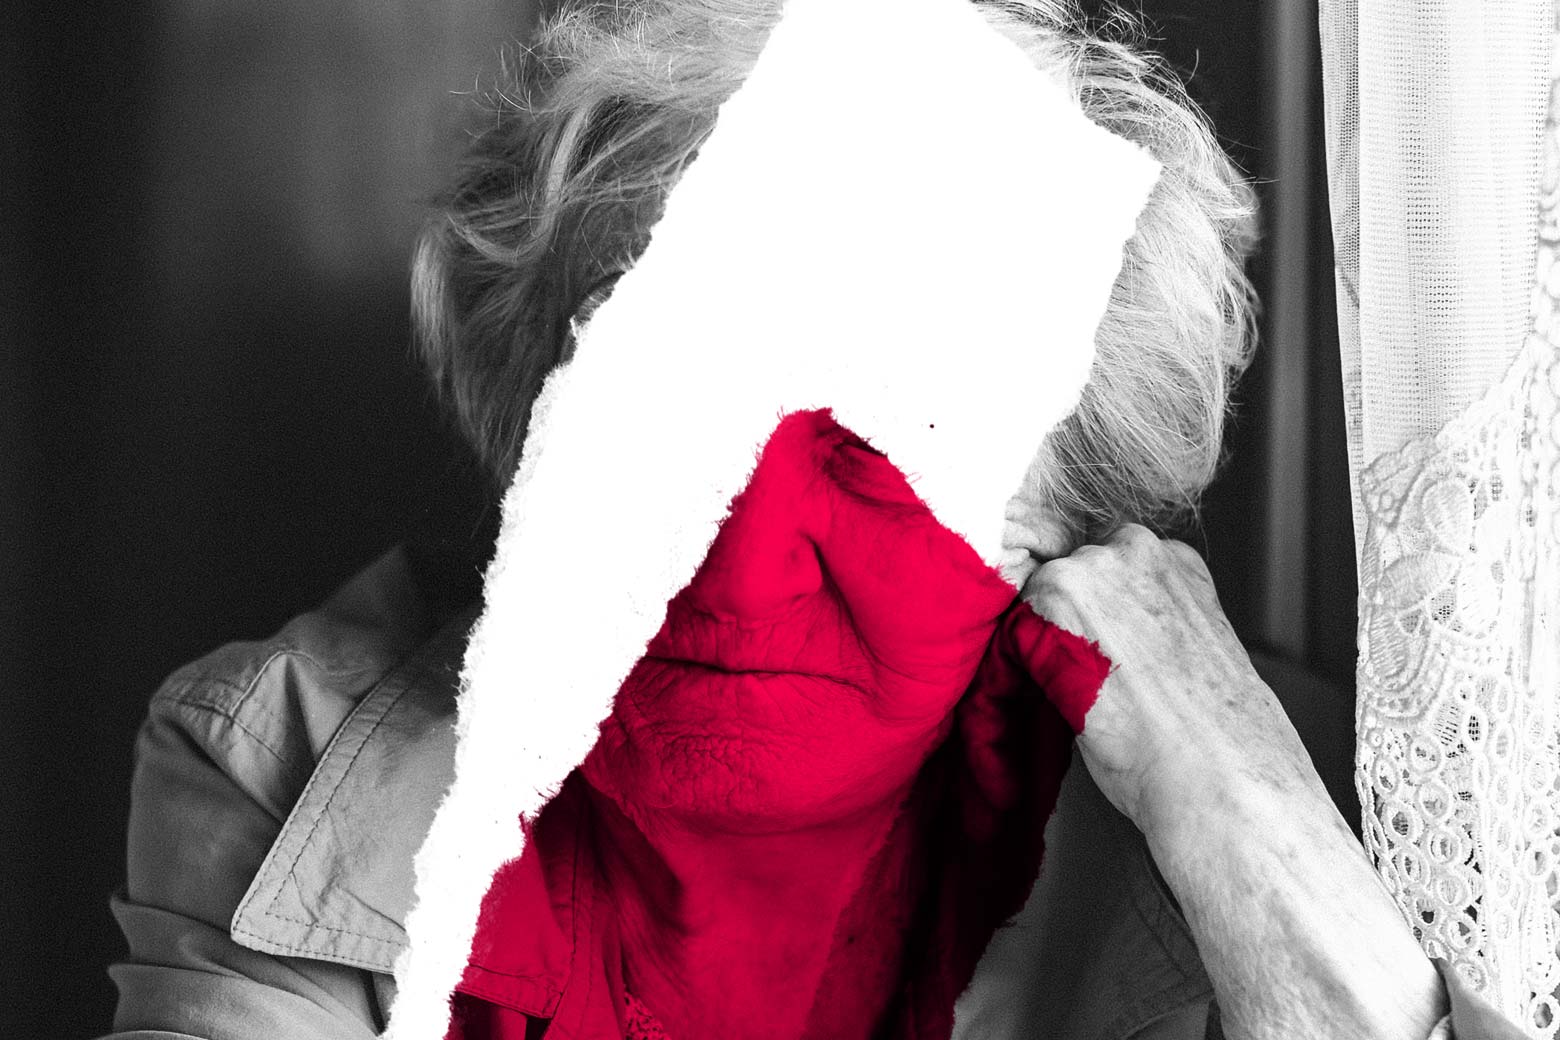 Photo illustration: torn image of an older woman.